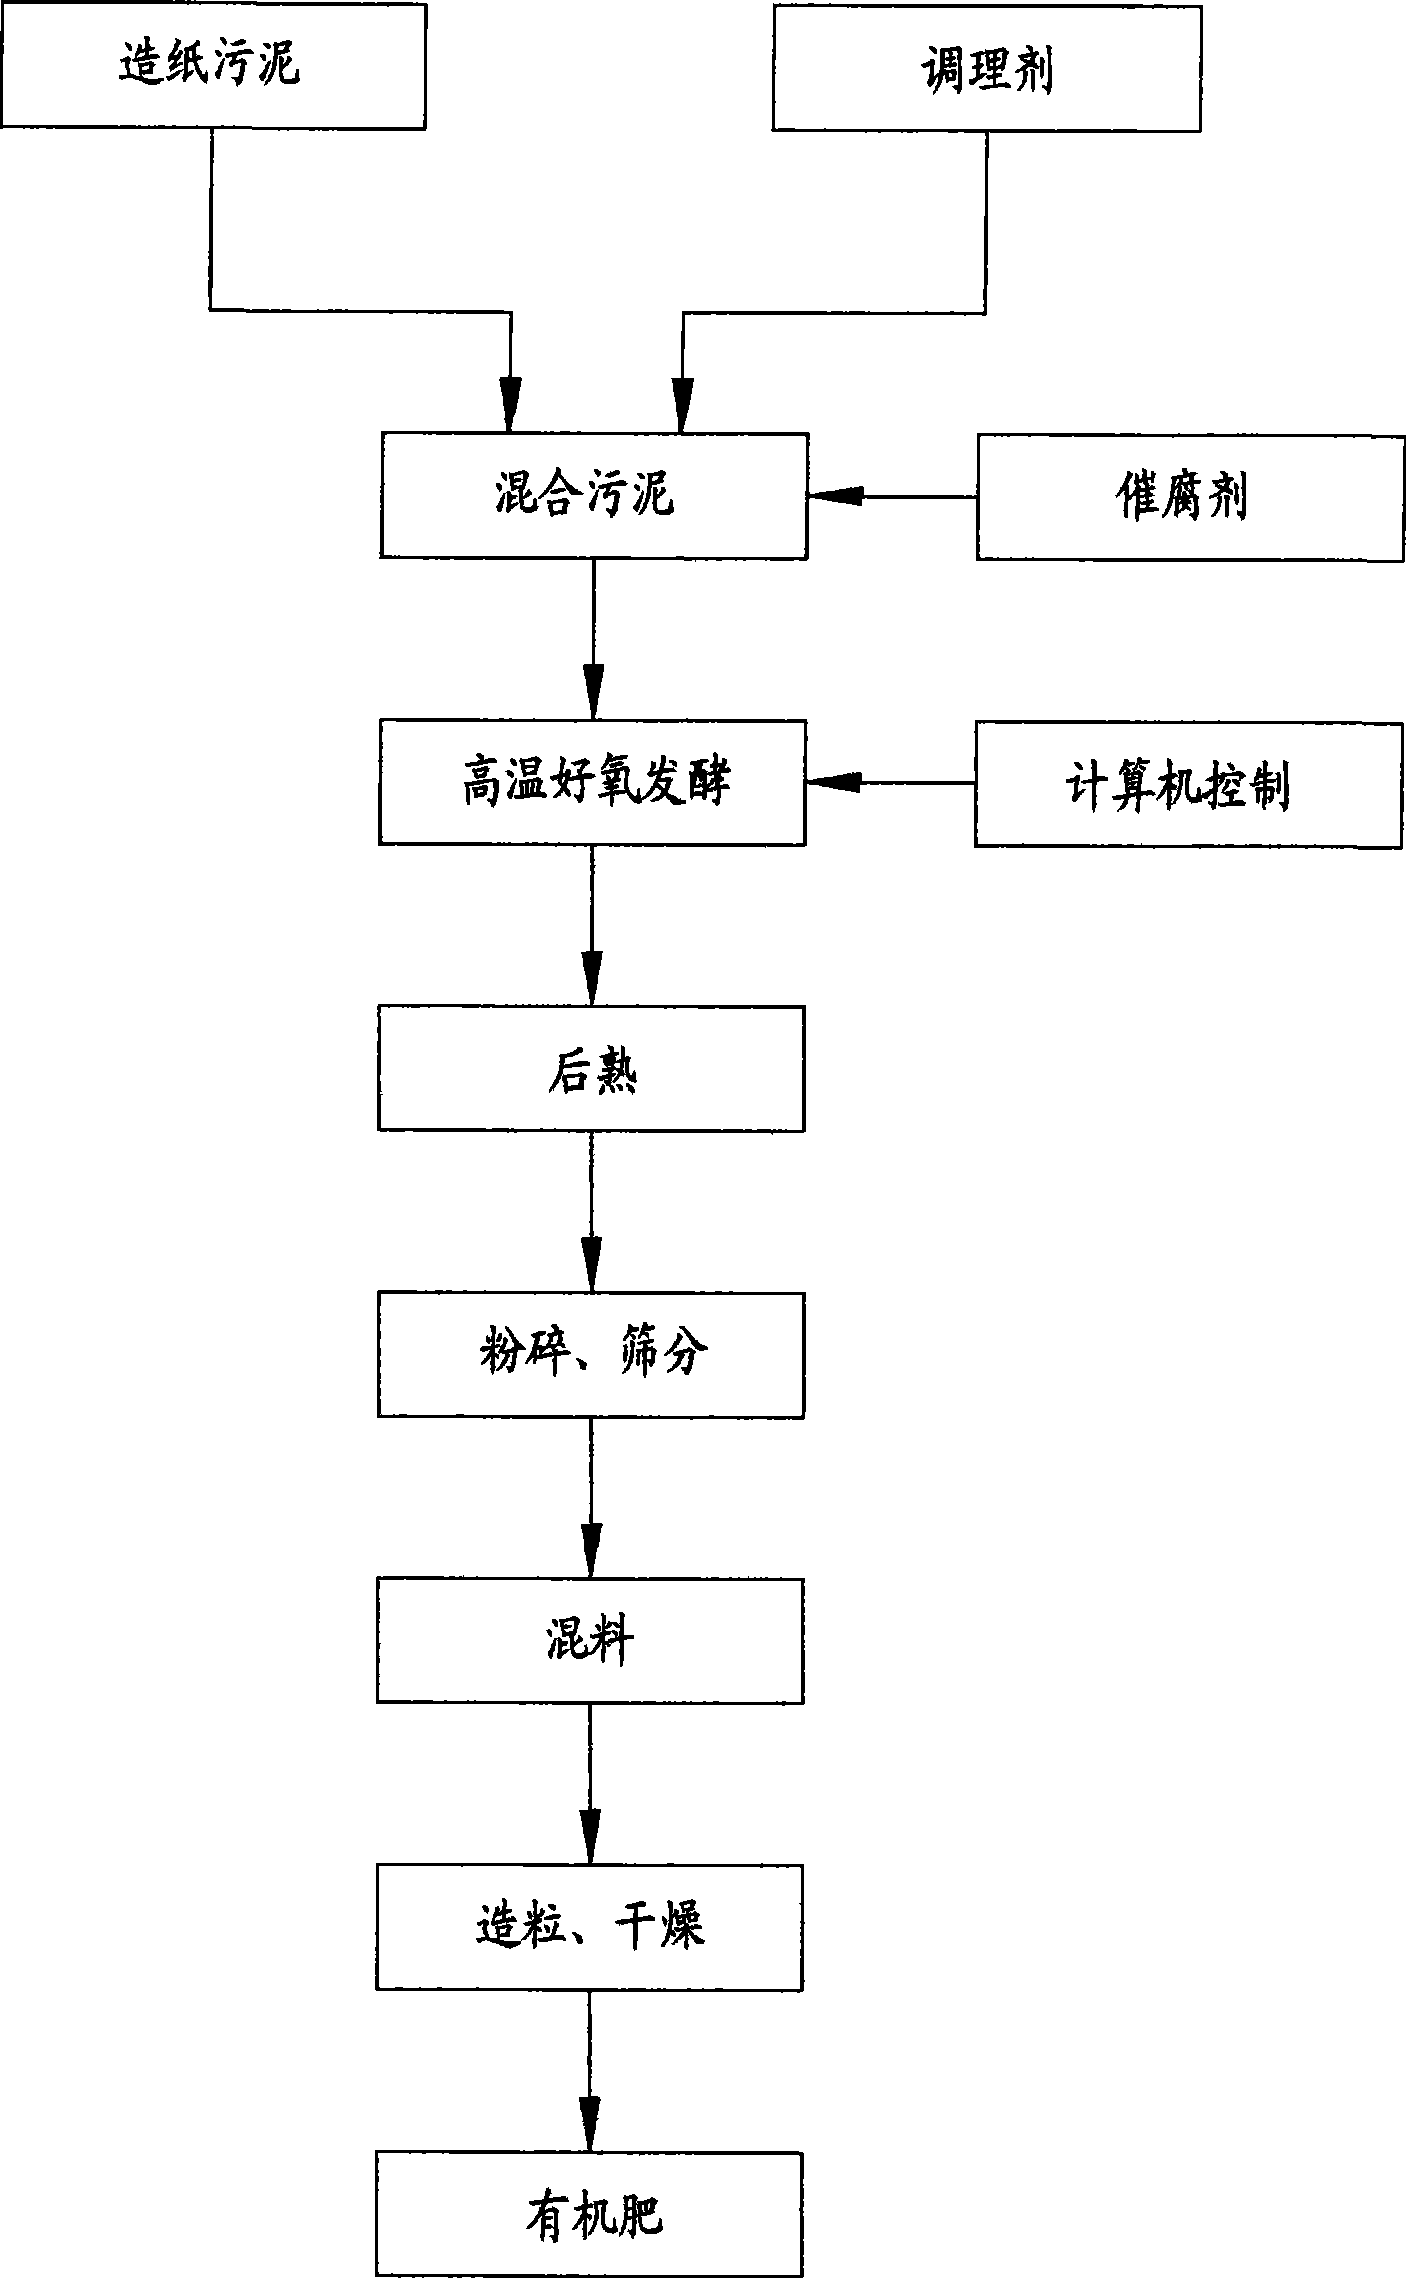 Method for producing fertilizer with papermaking sewage sludge